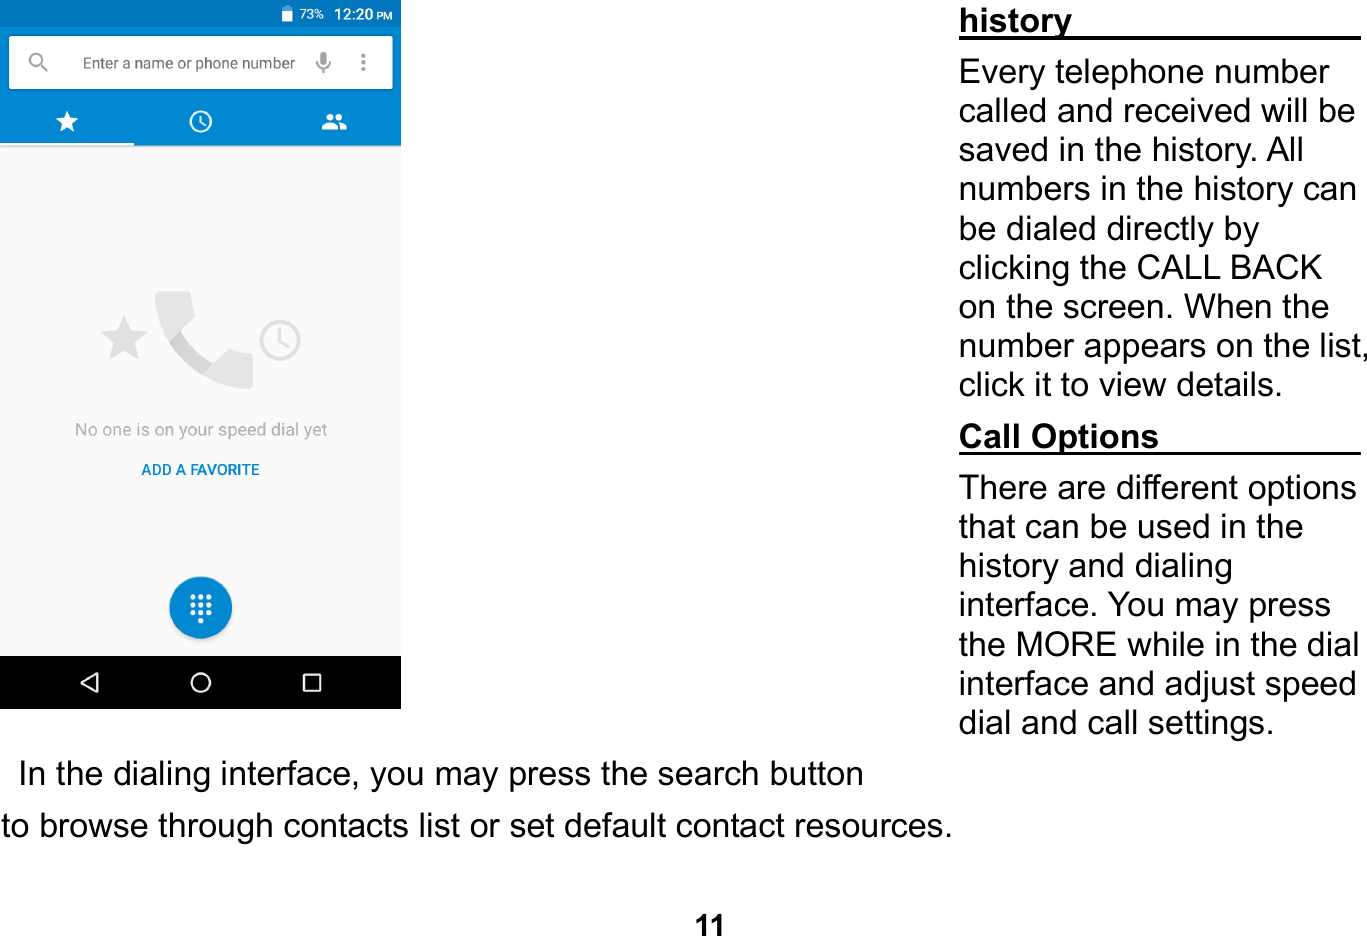   11  history                              Every telephone number called and received will be saved in the history. All numbers in the history can be dialed directly by clicking the CALL BACK on the screen. When the number appears on the list, click it to view details.   Call Options                         There are different options that can be used in the history and dialing interface. You may press the MORE while in the dial interface and adjust speed dial and call settings.   In the dialing interface, you may press the search button   to browse through contacts list or set default contact resources.   